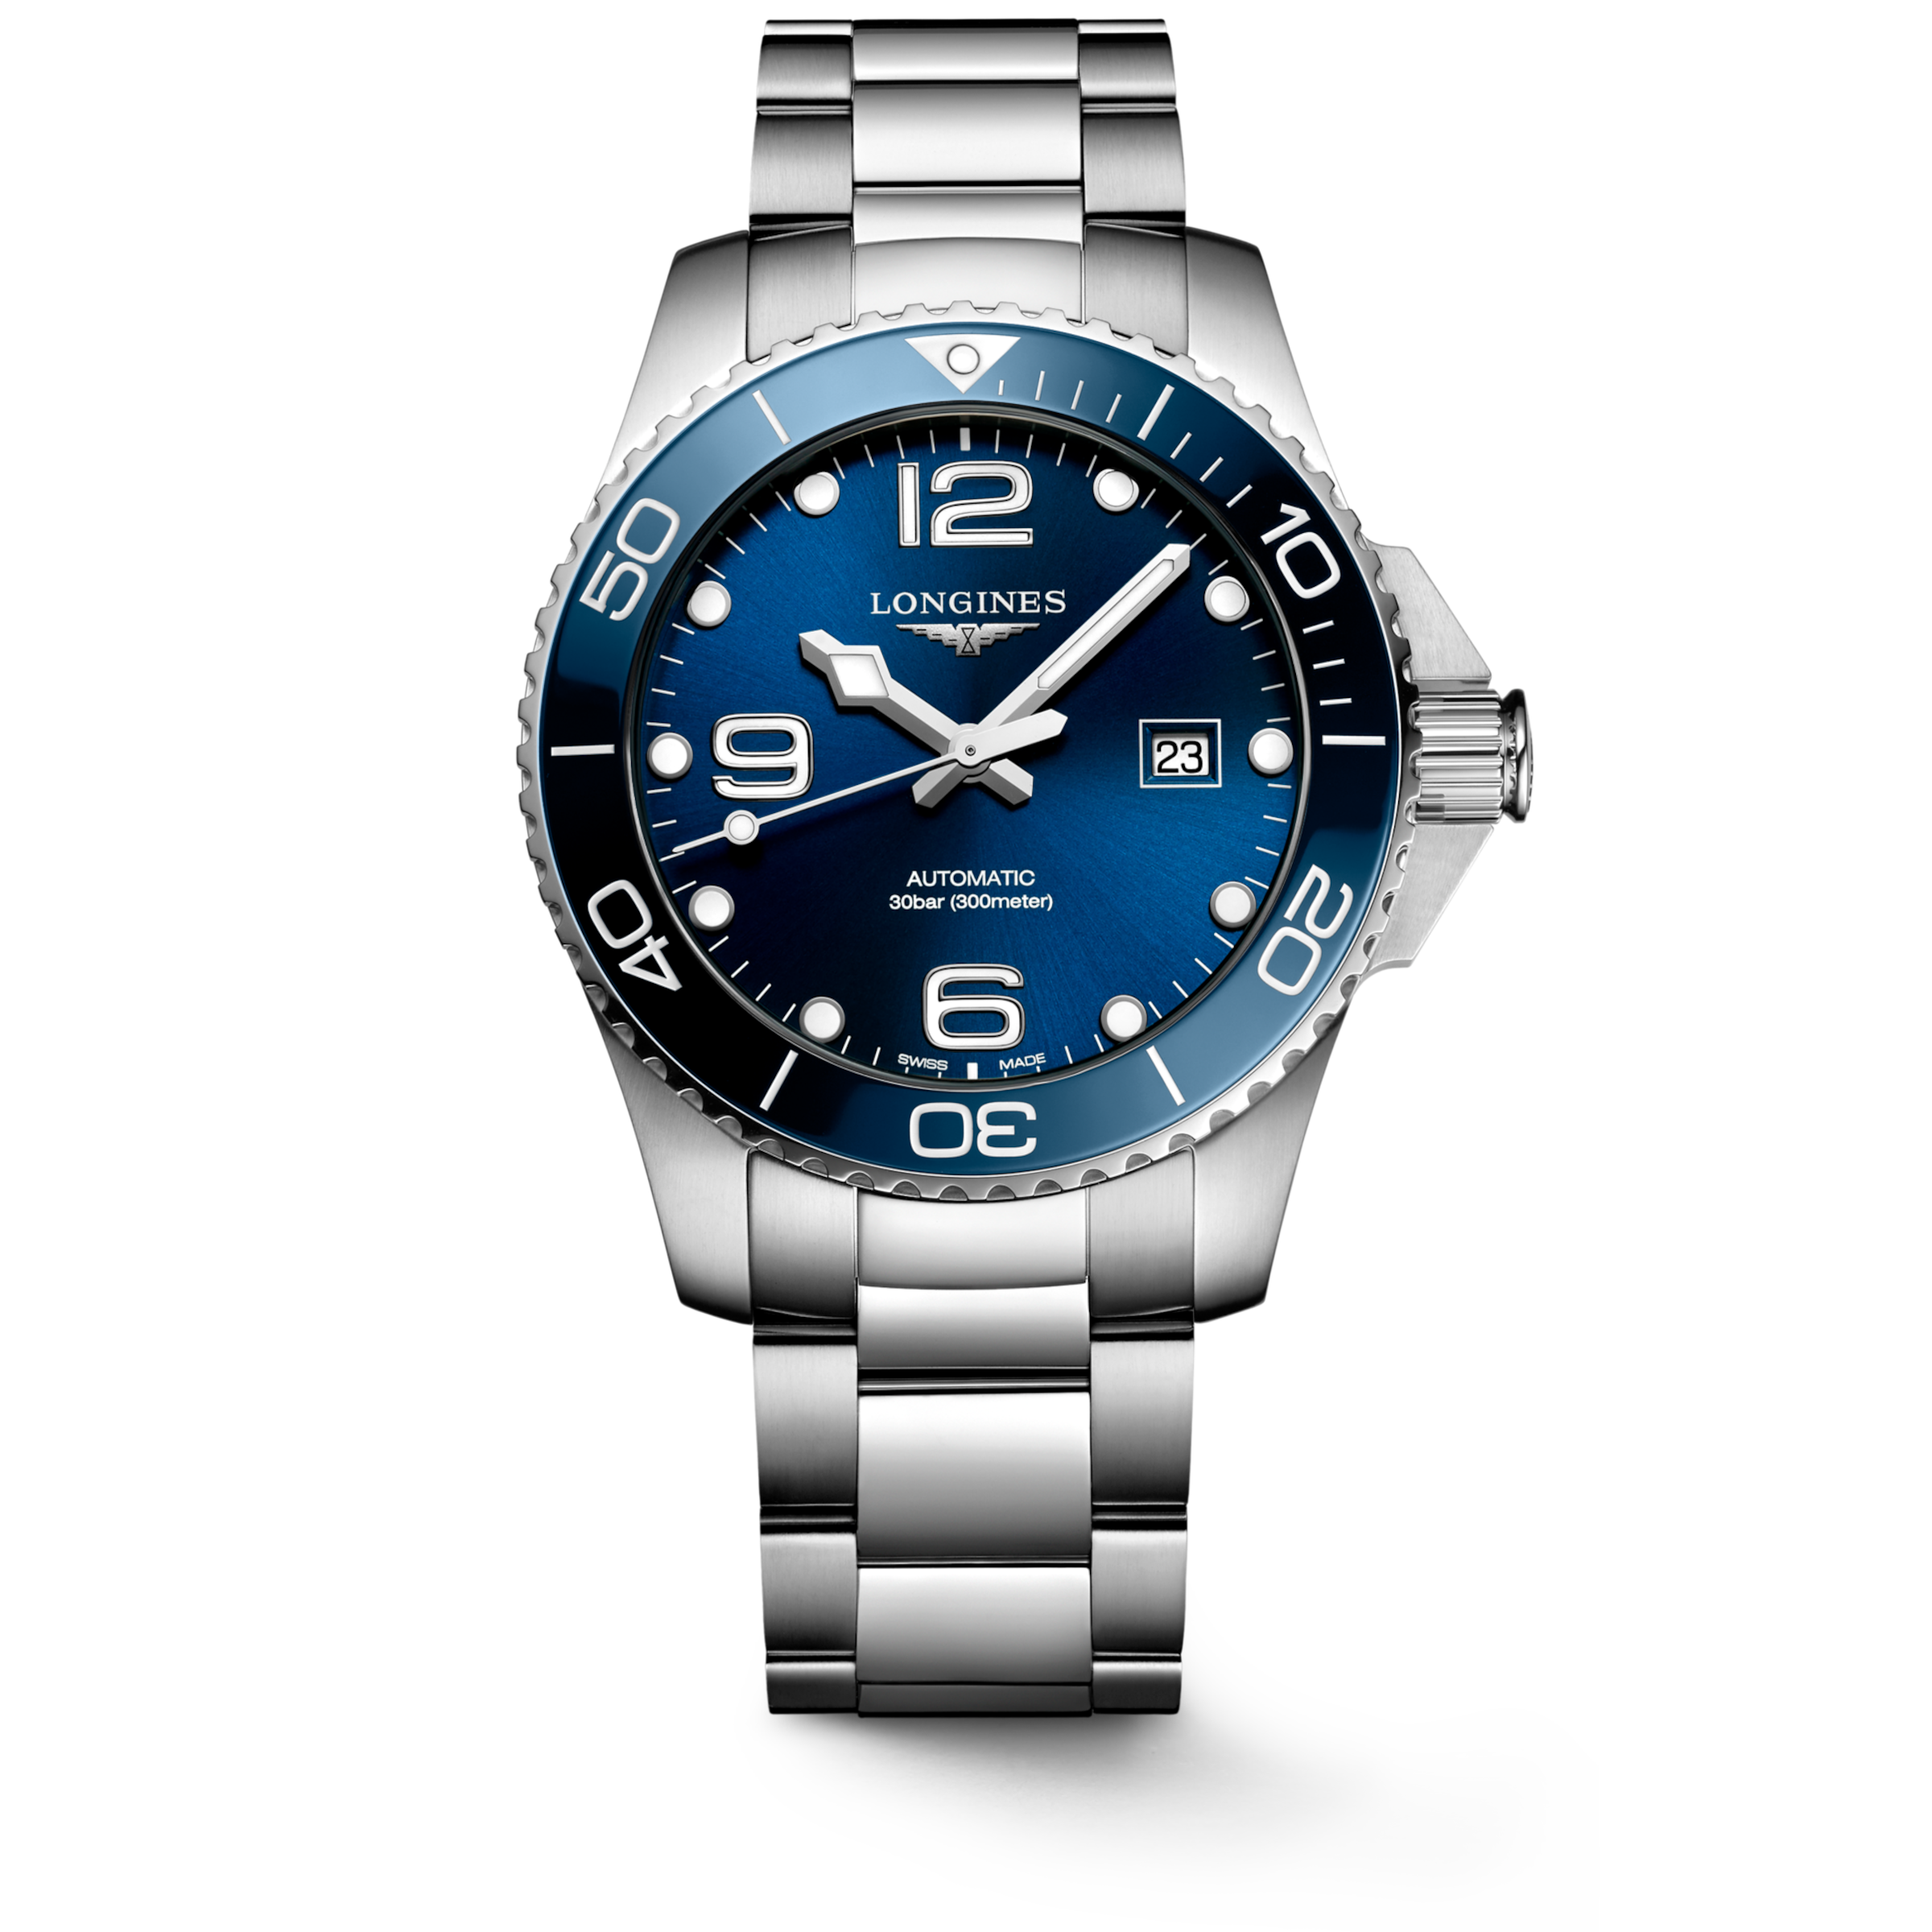 Longines HYDROCONQUEST Automatic Stainless steel and ceramic bezel Watch - L3.782.4.96.6